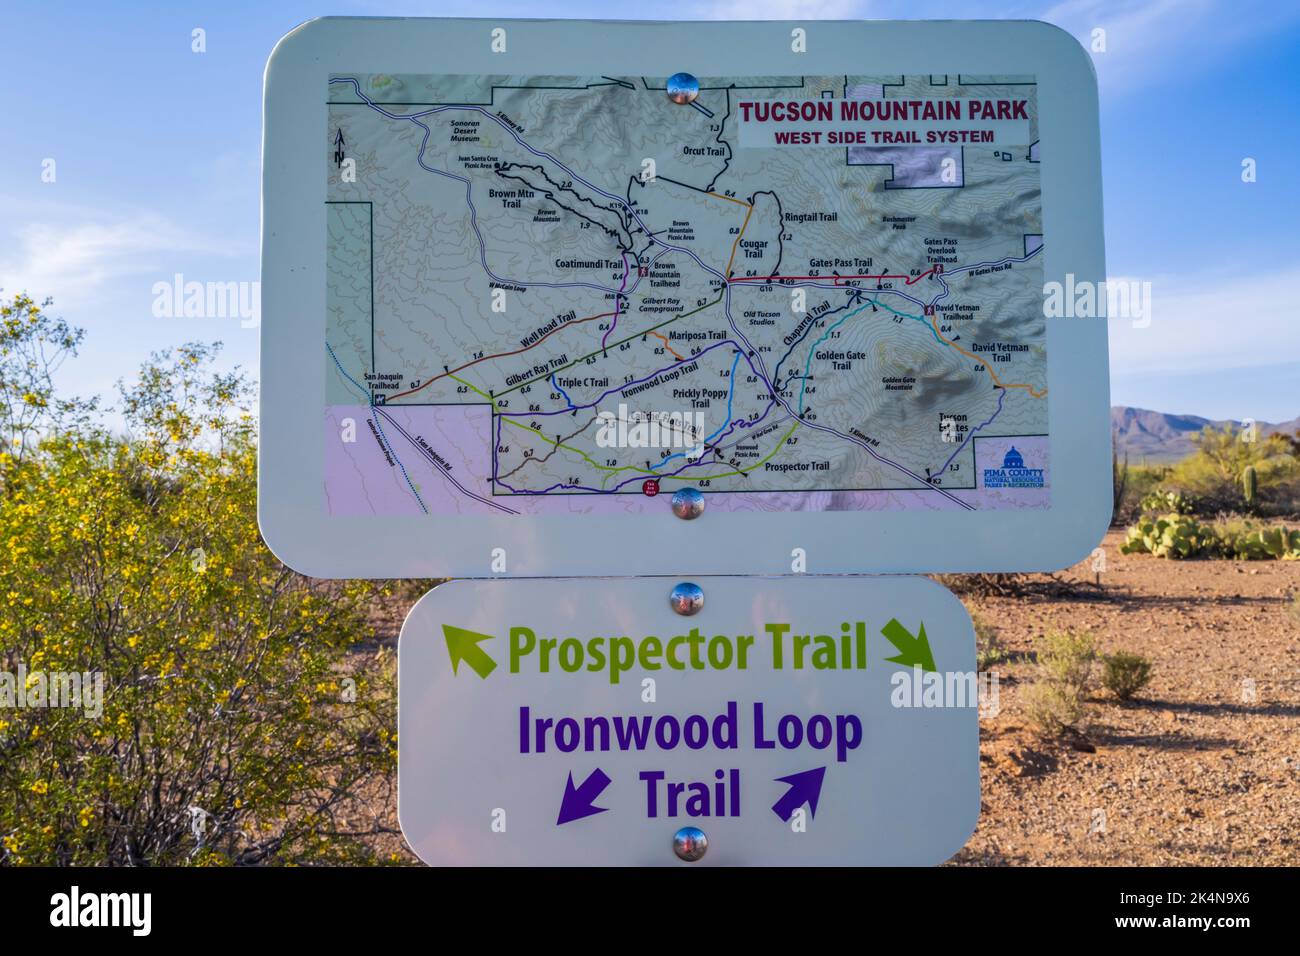 Tucson, AZ, USA - April 6, 2021: The different kinds of trials going to its scenic destination Stock Photo